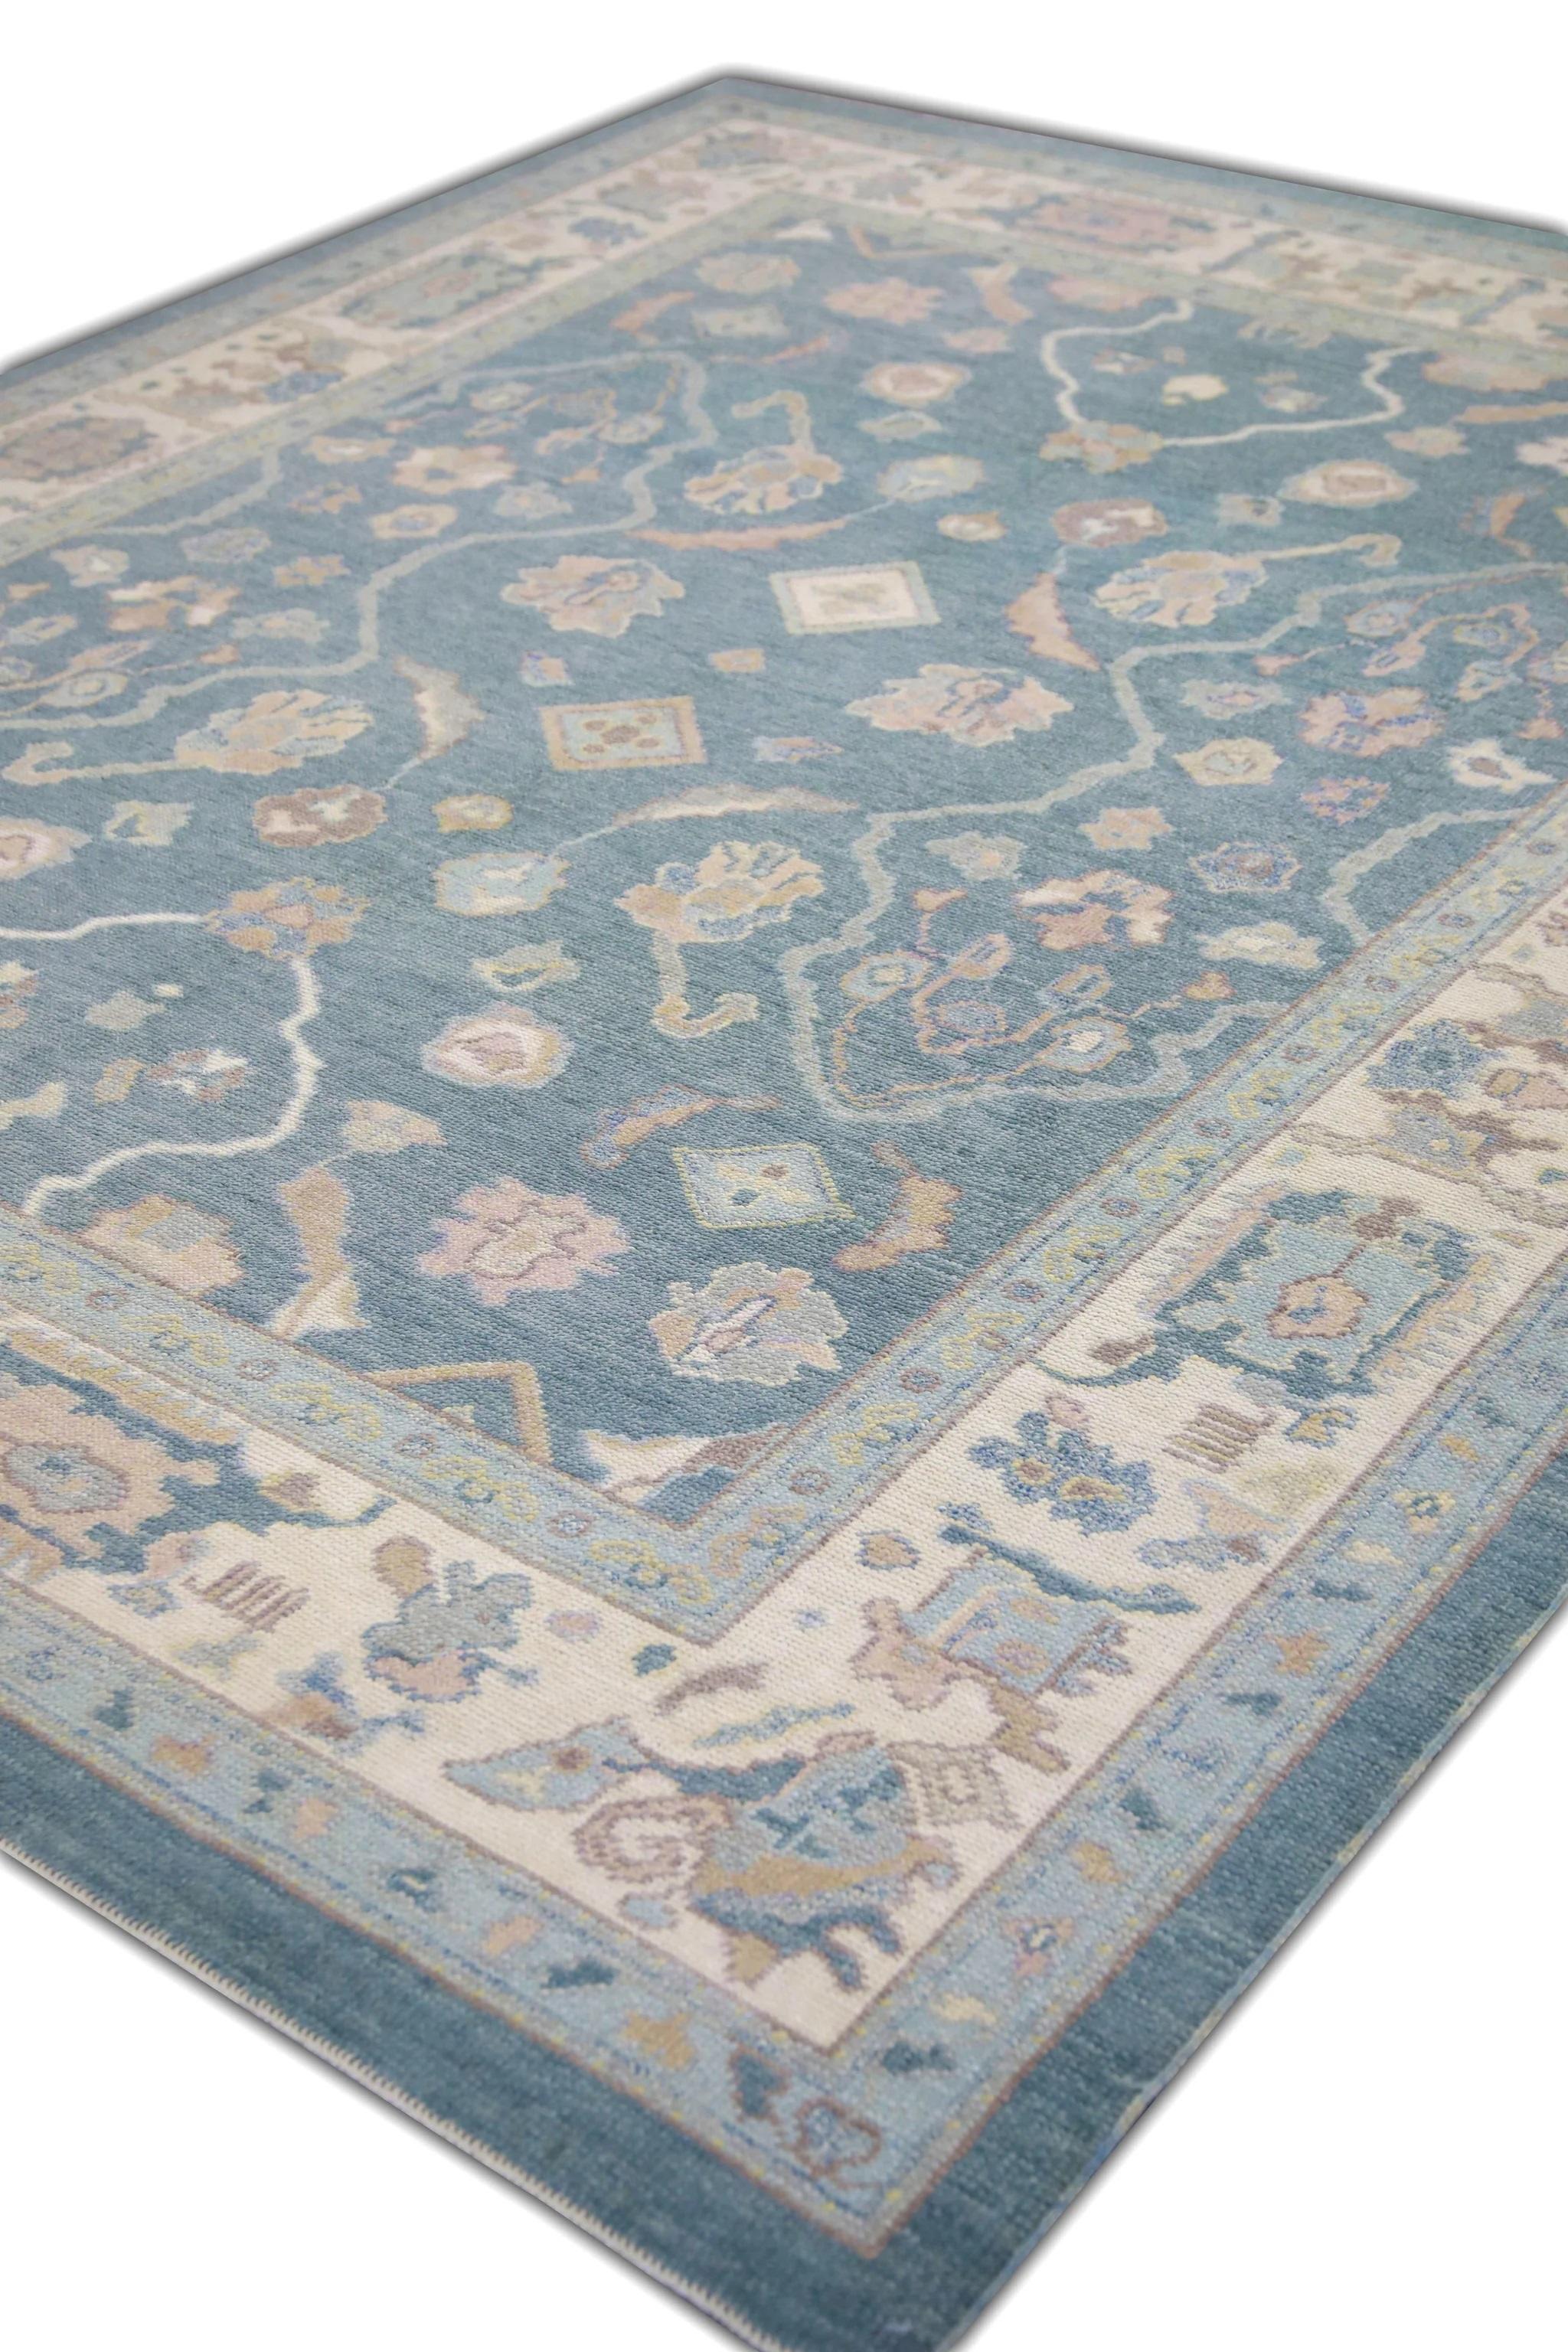 Contemporary Handwoven Wool Floral Turkish Oushak Rug in Blue and Pink 8'2